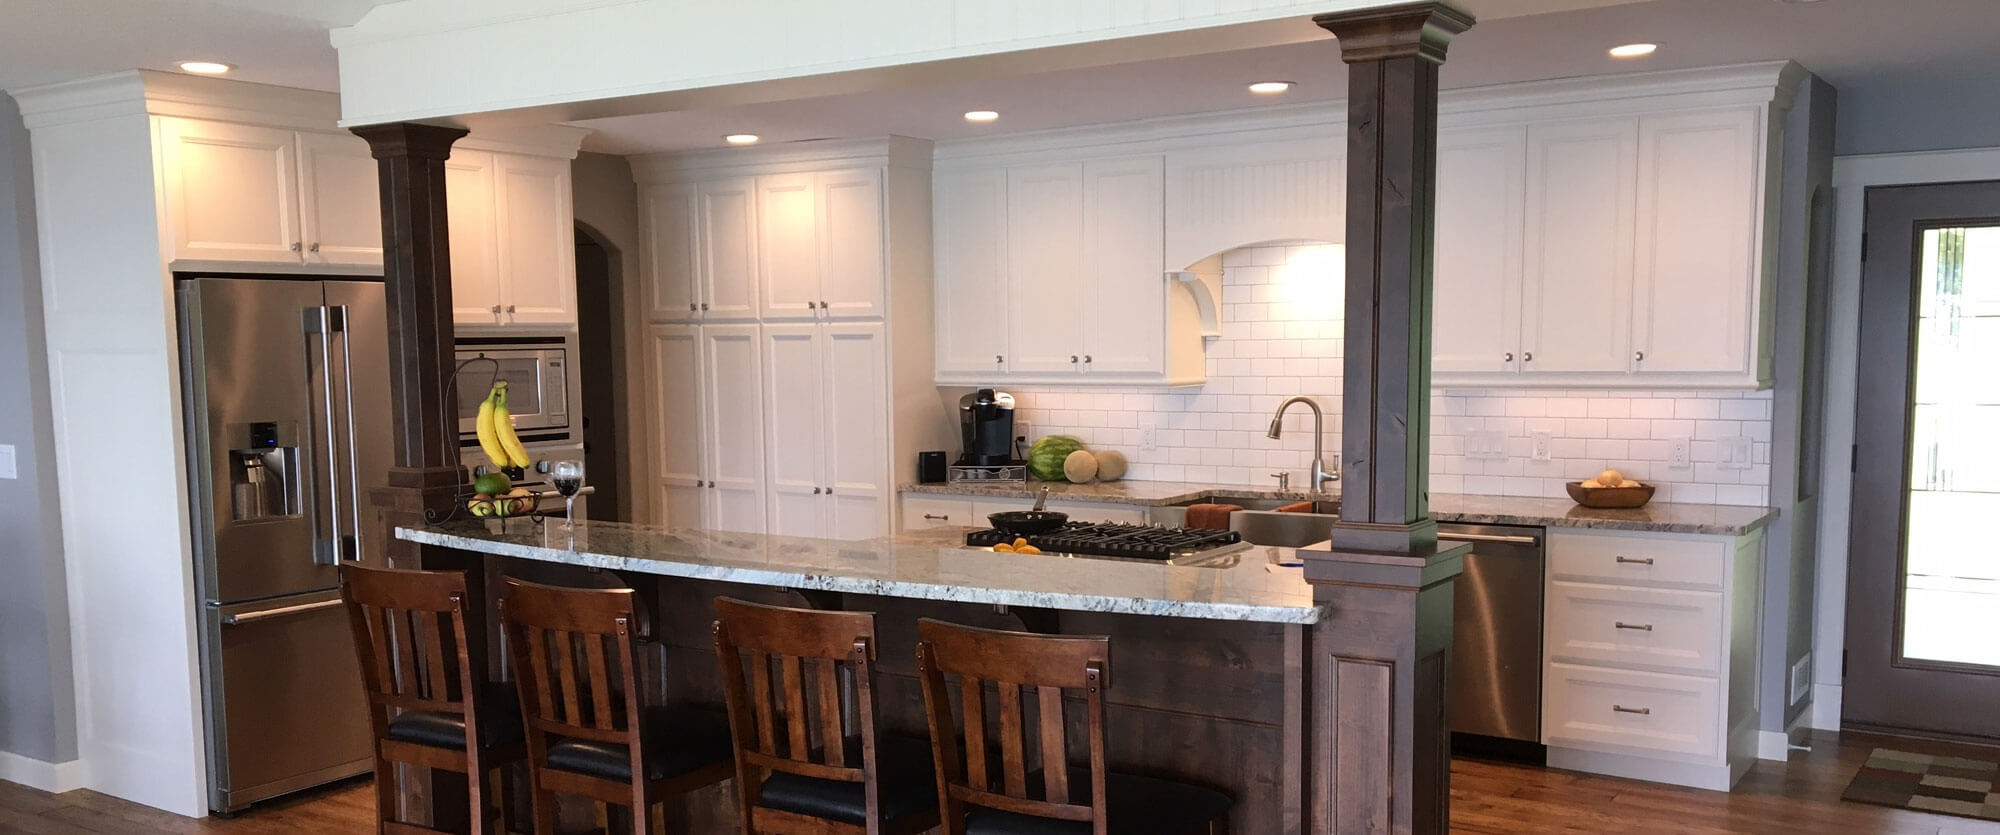 Custom kitchen cabinets made of solid wood and painted white featuring a breakfast bar island; designed, built, and installed by finewood Structures of Browerville, MN